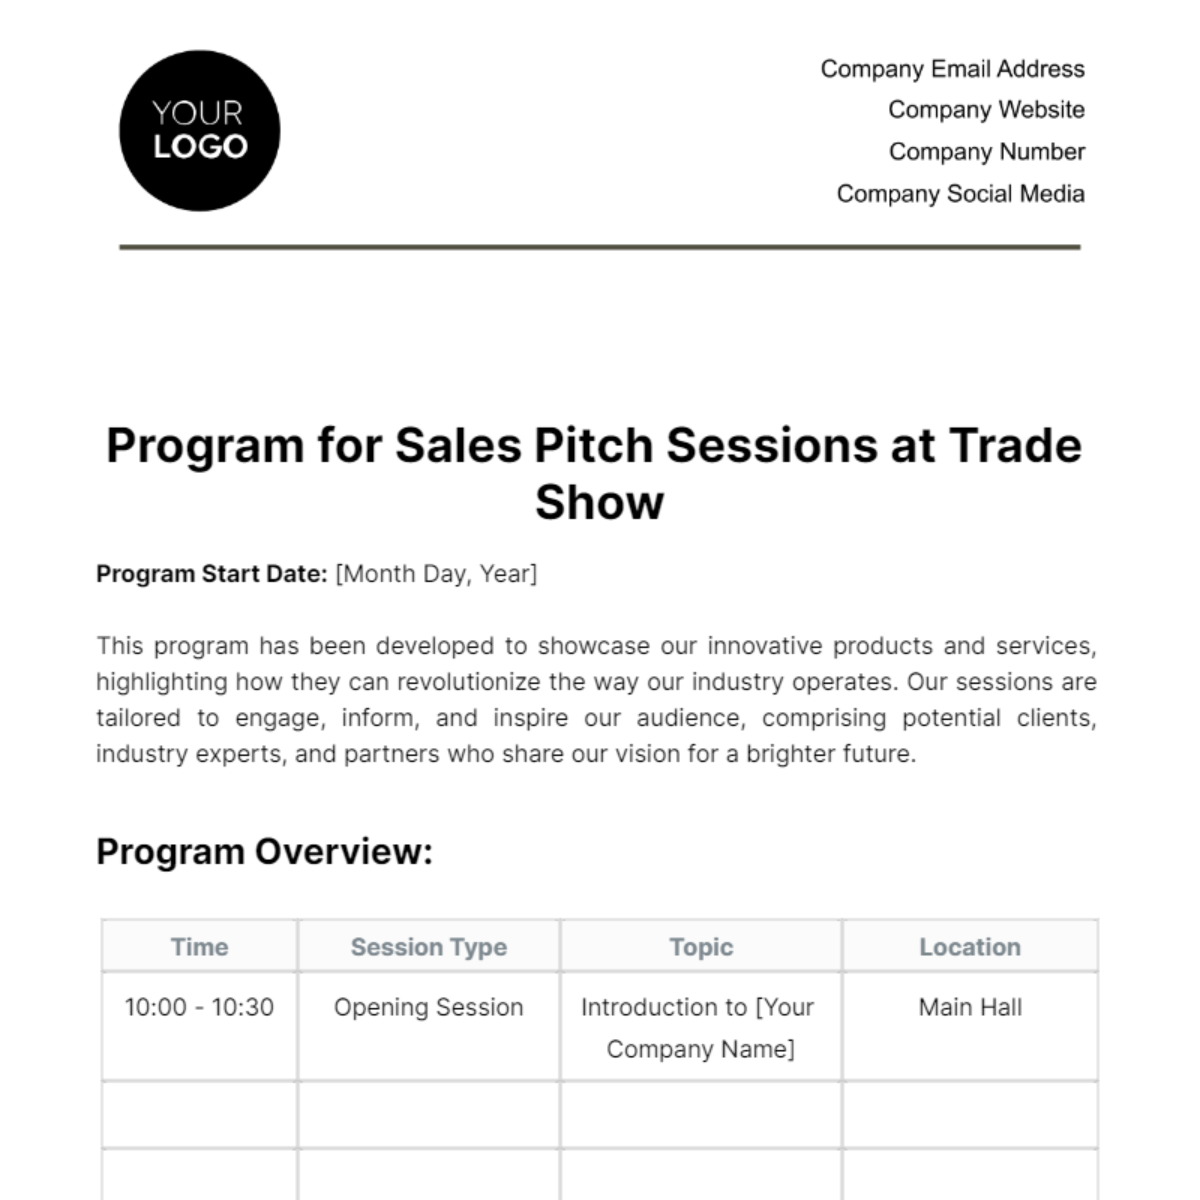 Program for Sales Pitch Sessions at Trade Show Template